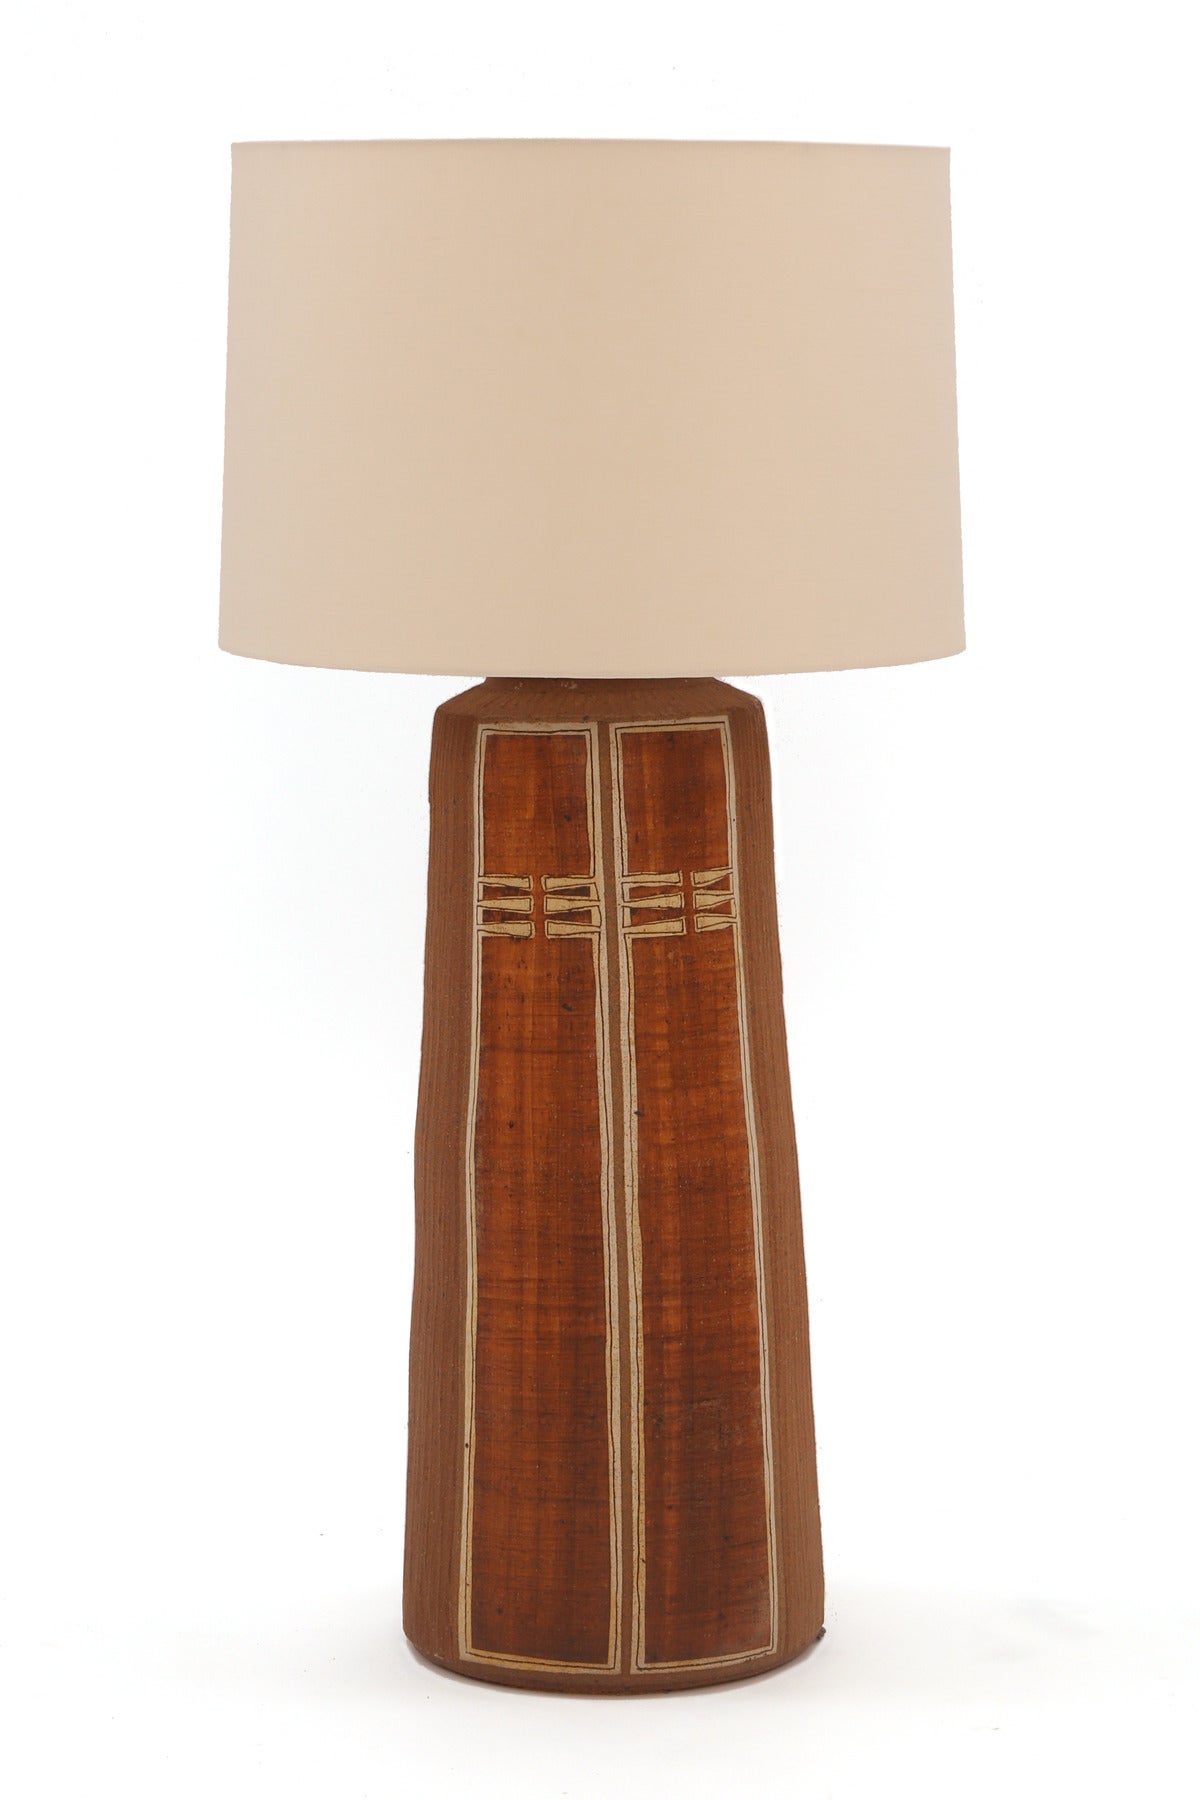 Monumental glazed earthenware lamp, circa early 1970s. This massive example nearly 30